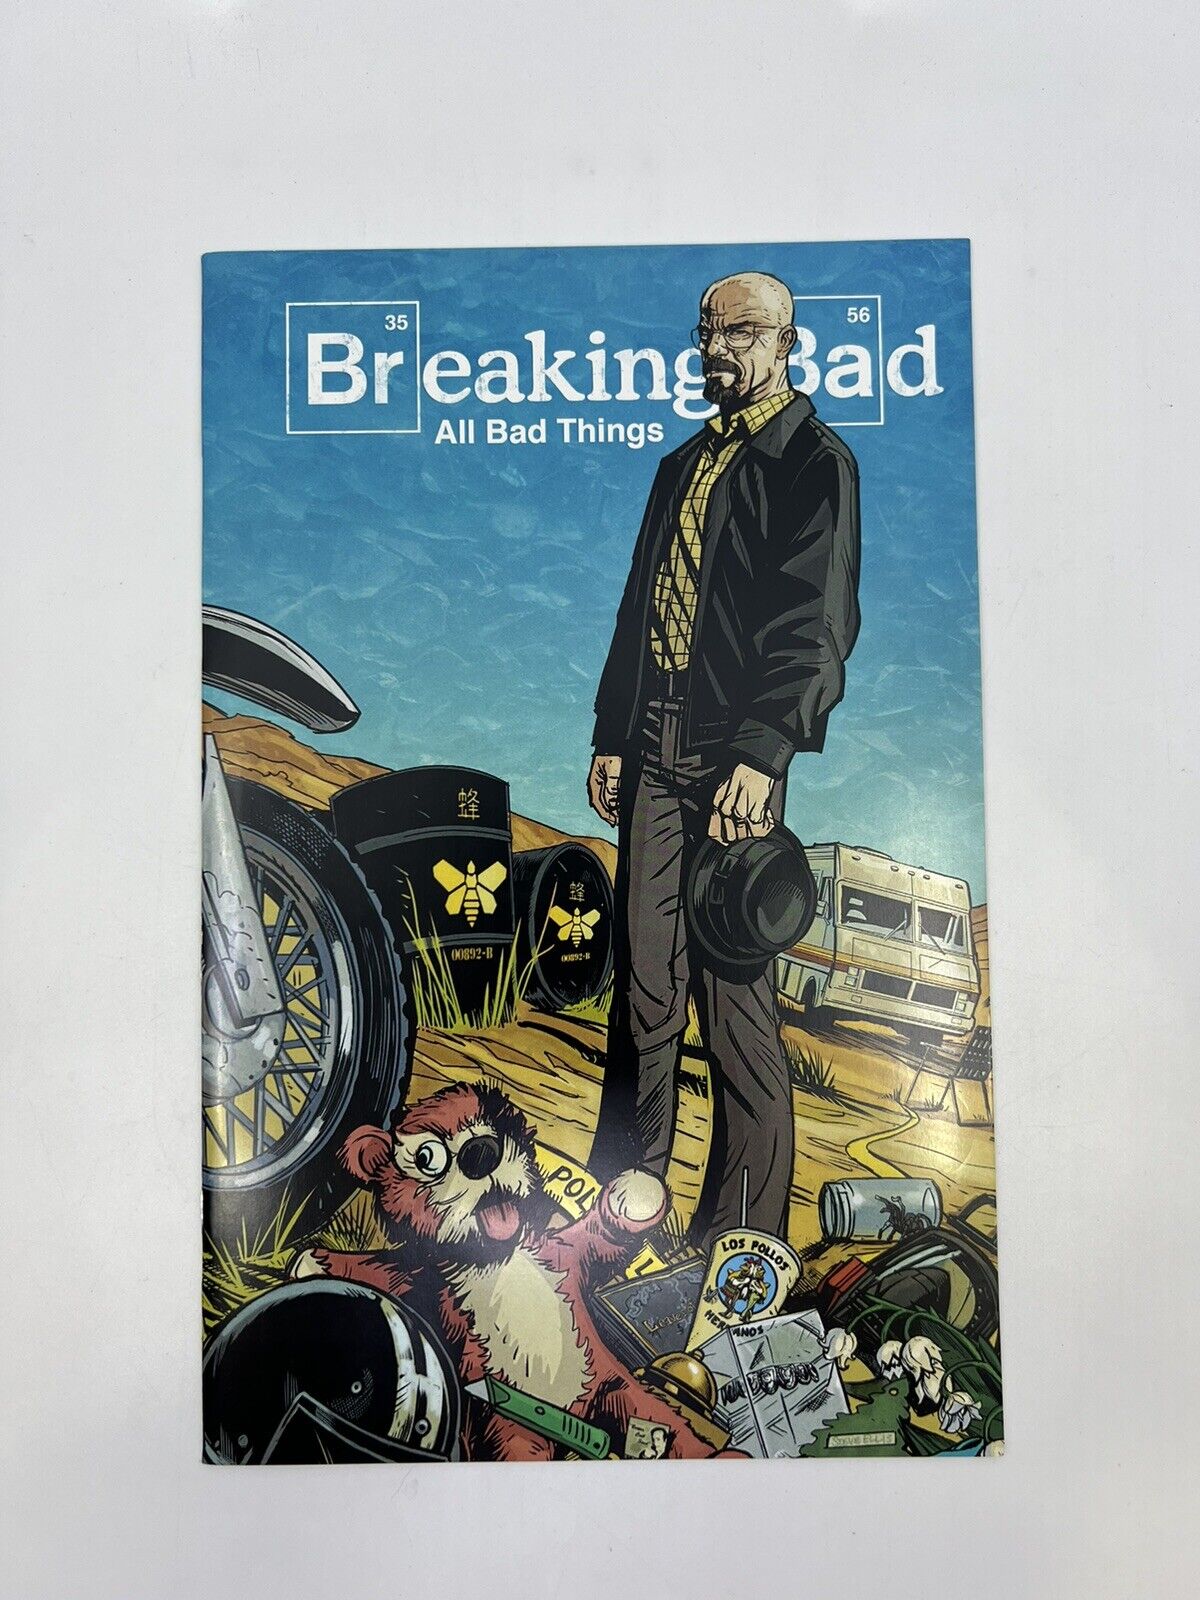 2013 AMC BREAKING BAD ALL BAD THINGS #1 COMIC 500 PRINT RUN SEE PICTURES